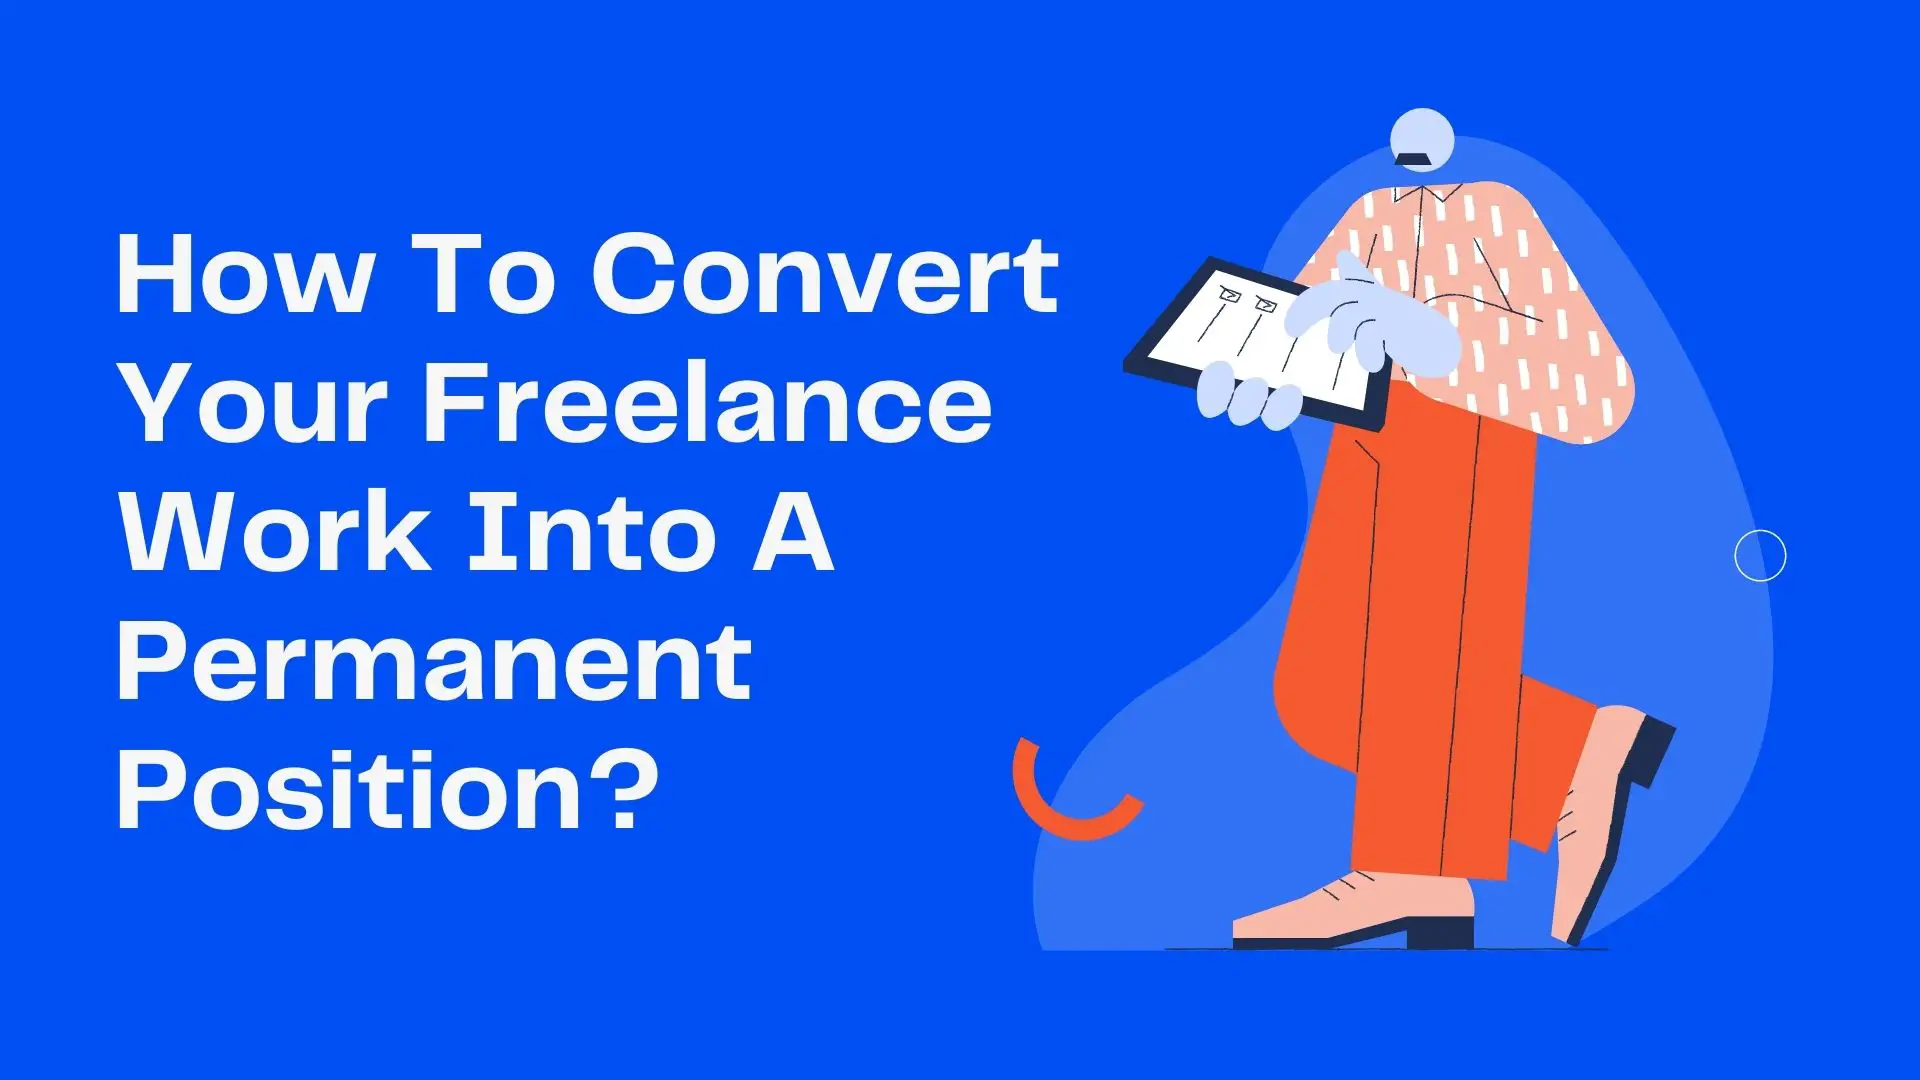 How To Convert Your Freelance Work Into A Permanent Position?